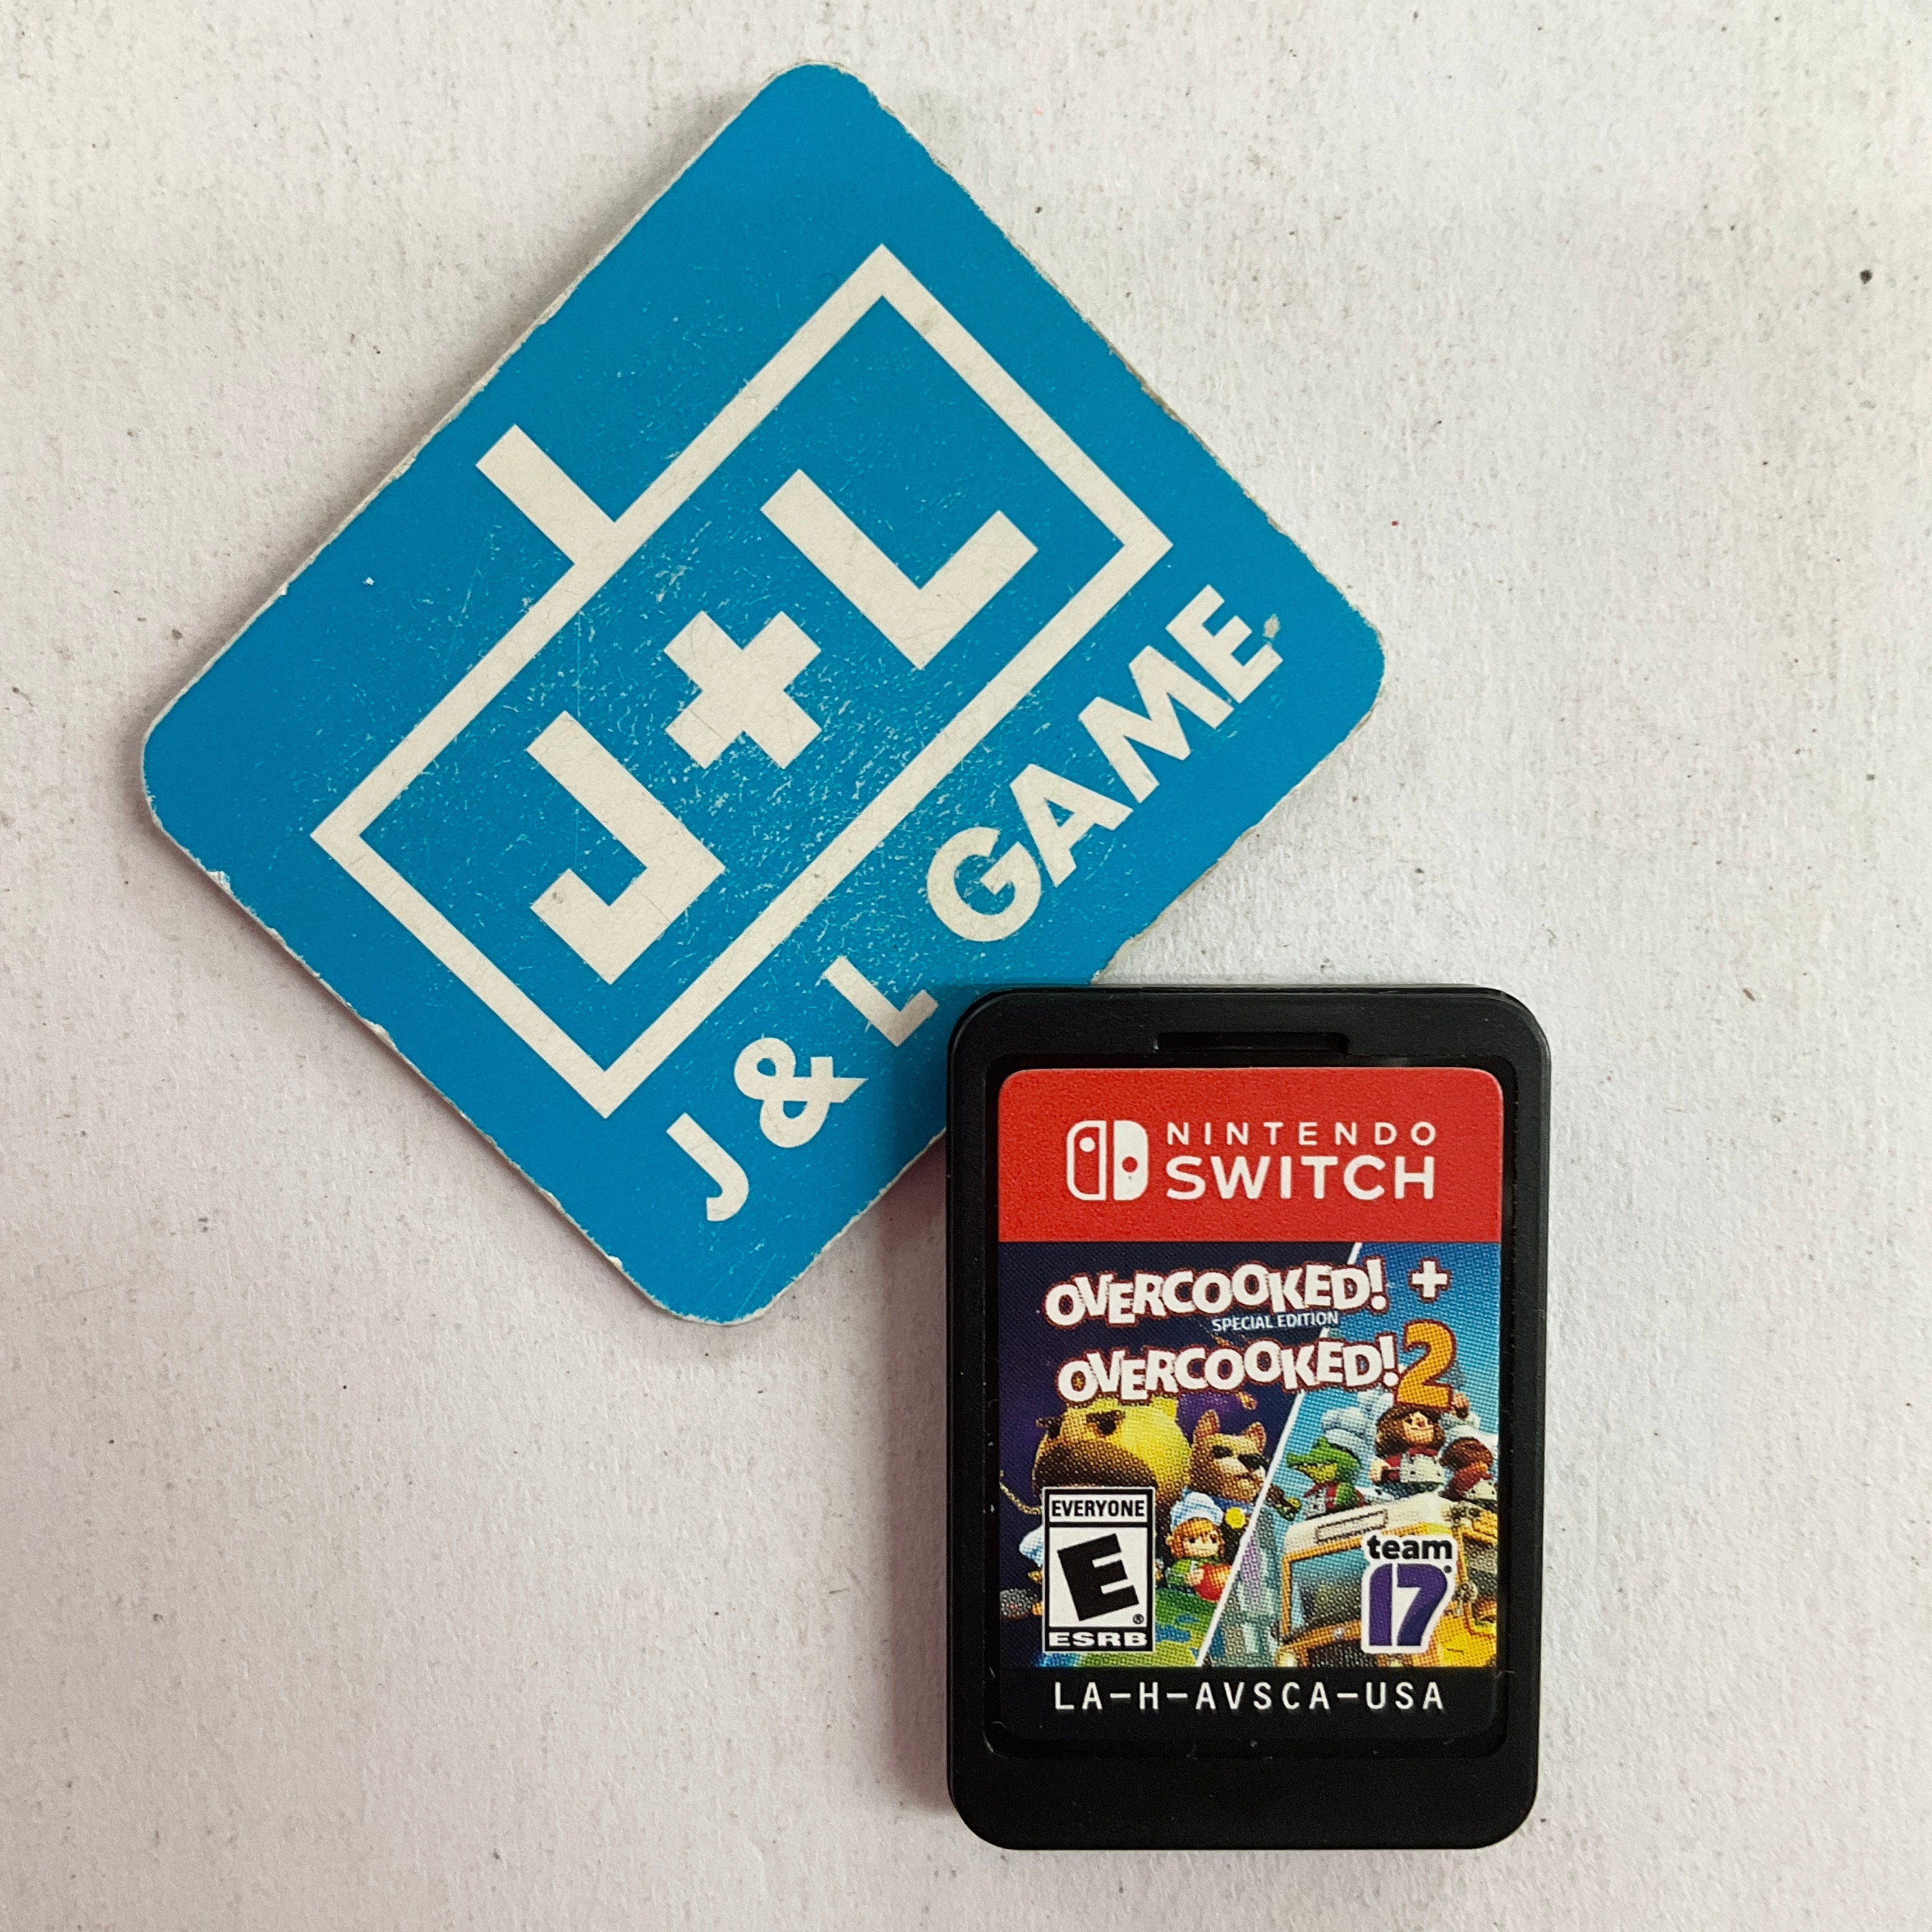 Overcooked! Special Edition + Overcooked! 2 - (NSW) Nintendo Switch [Pre-Owned] Video Games Team 17   